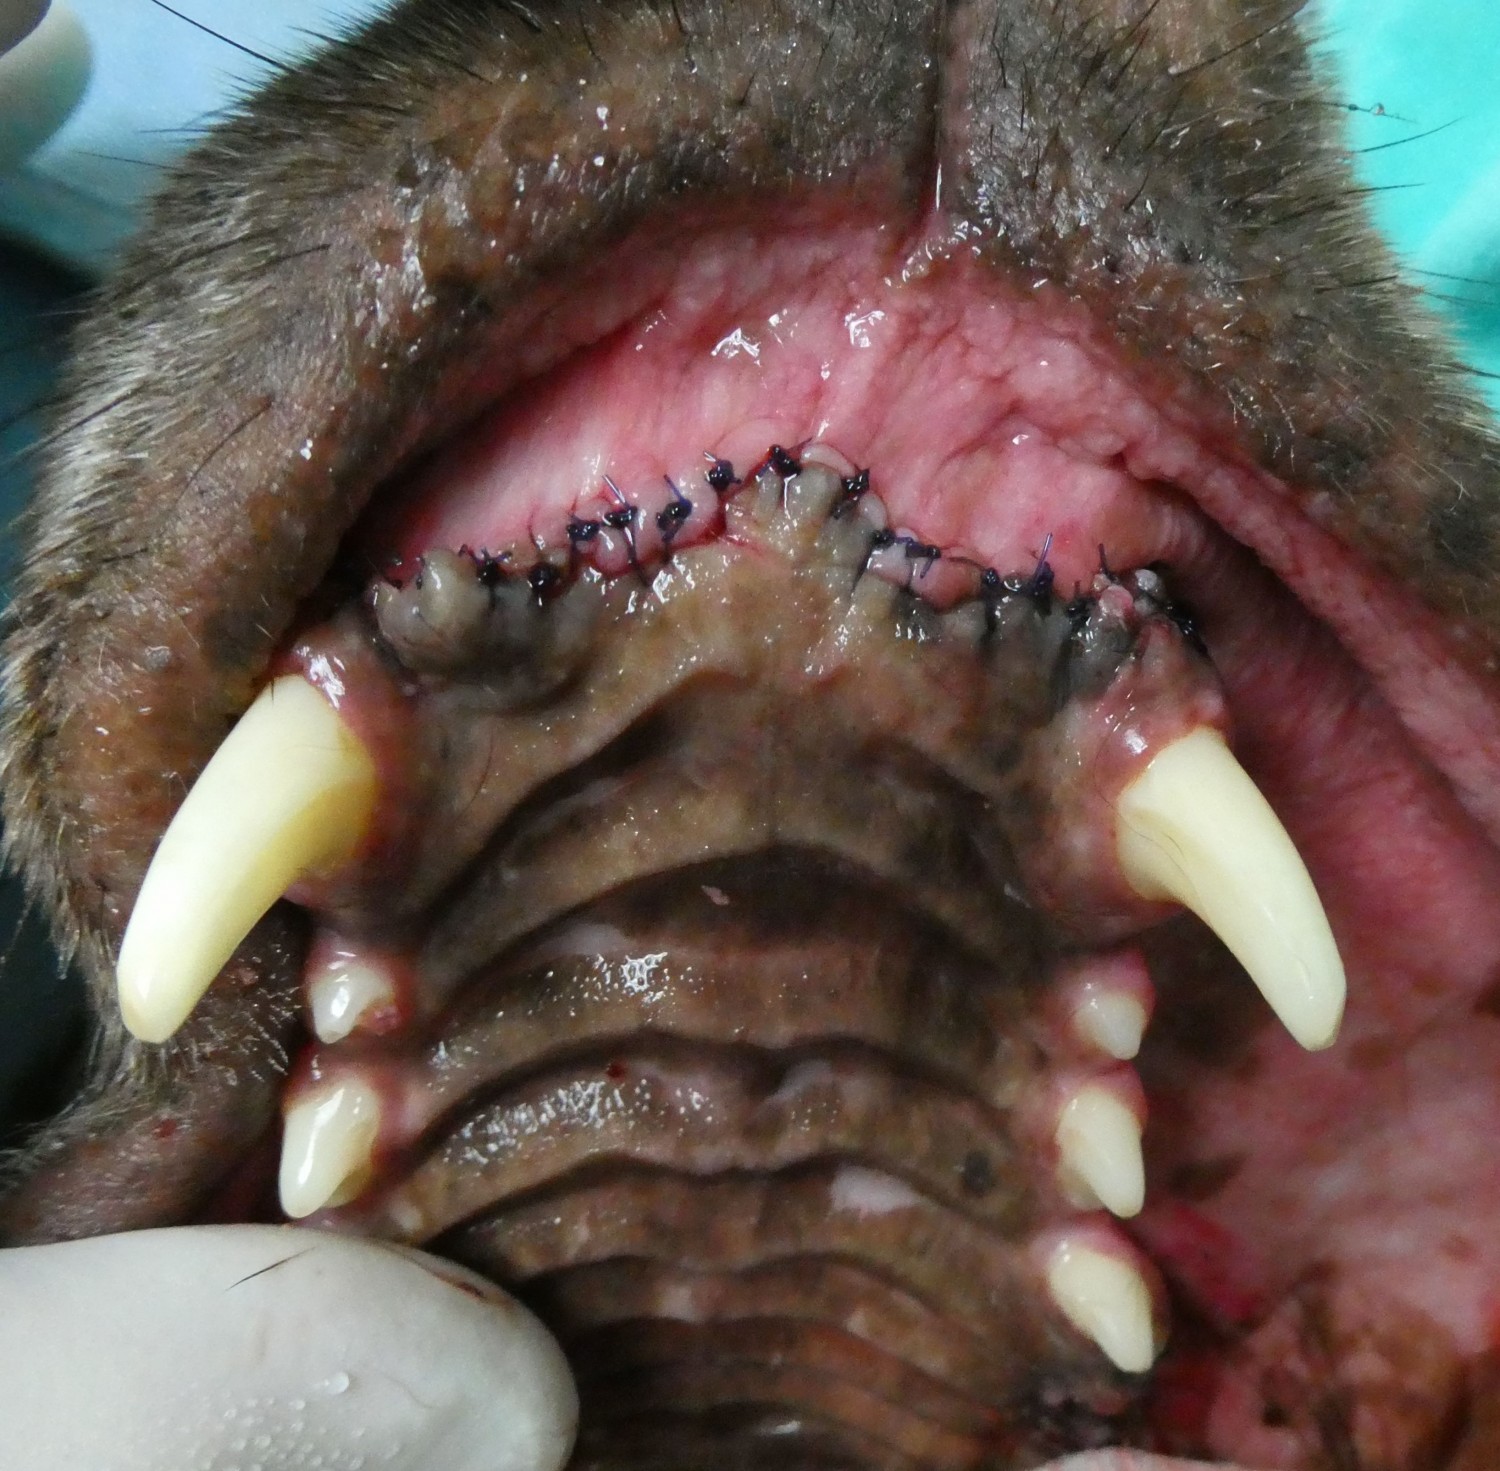 after oral mass removal